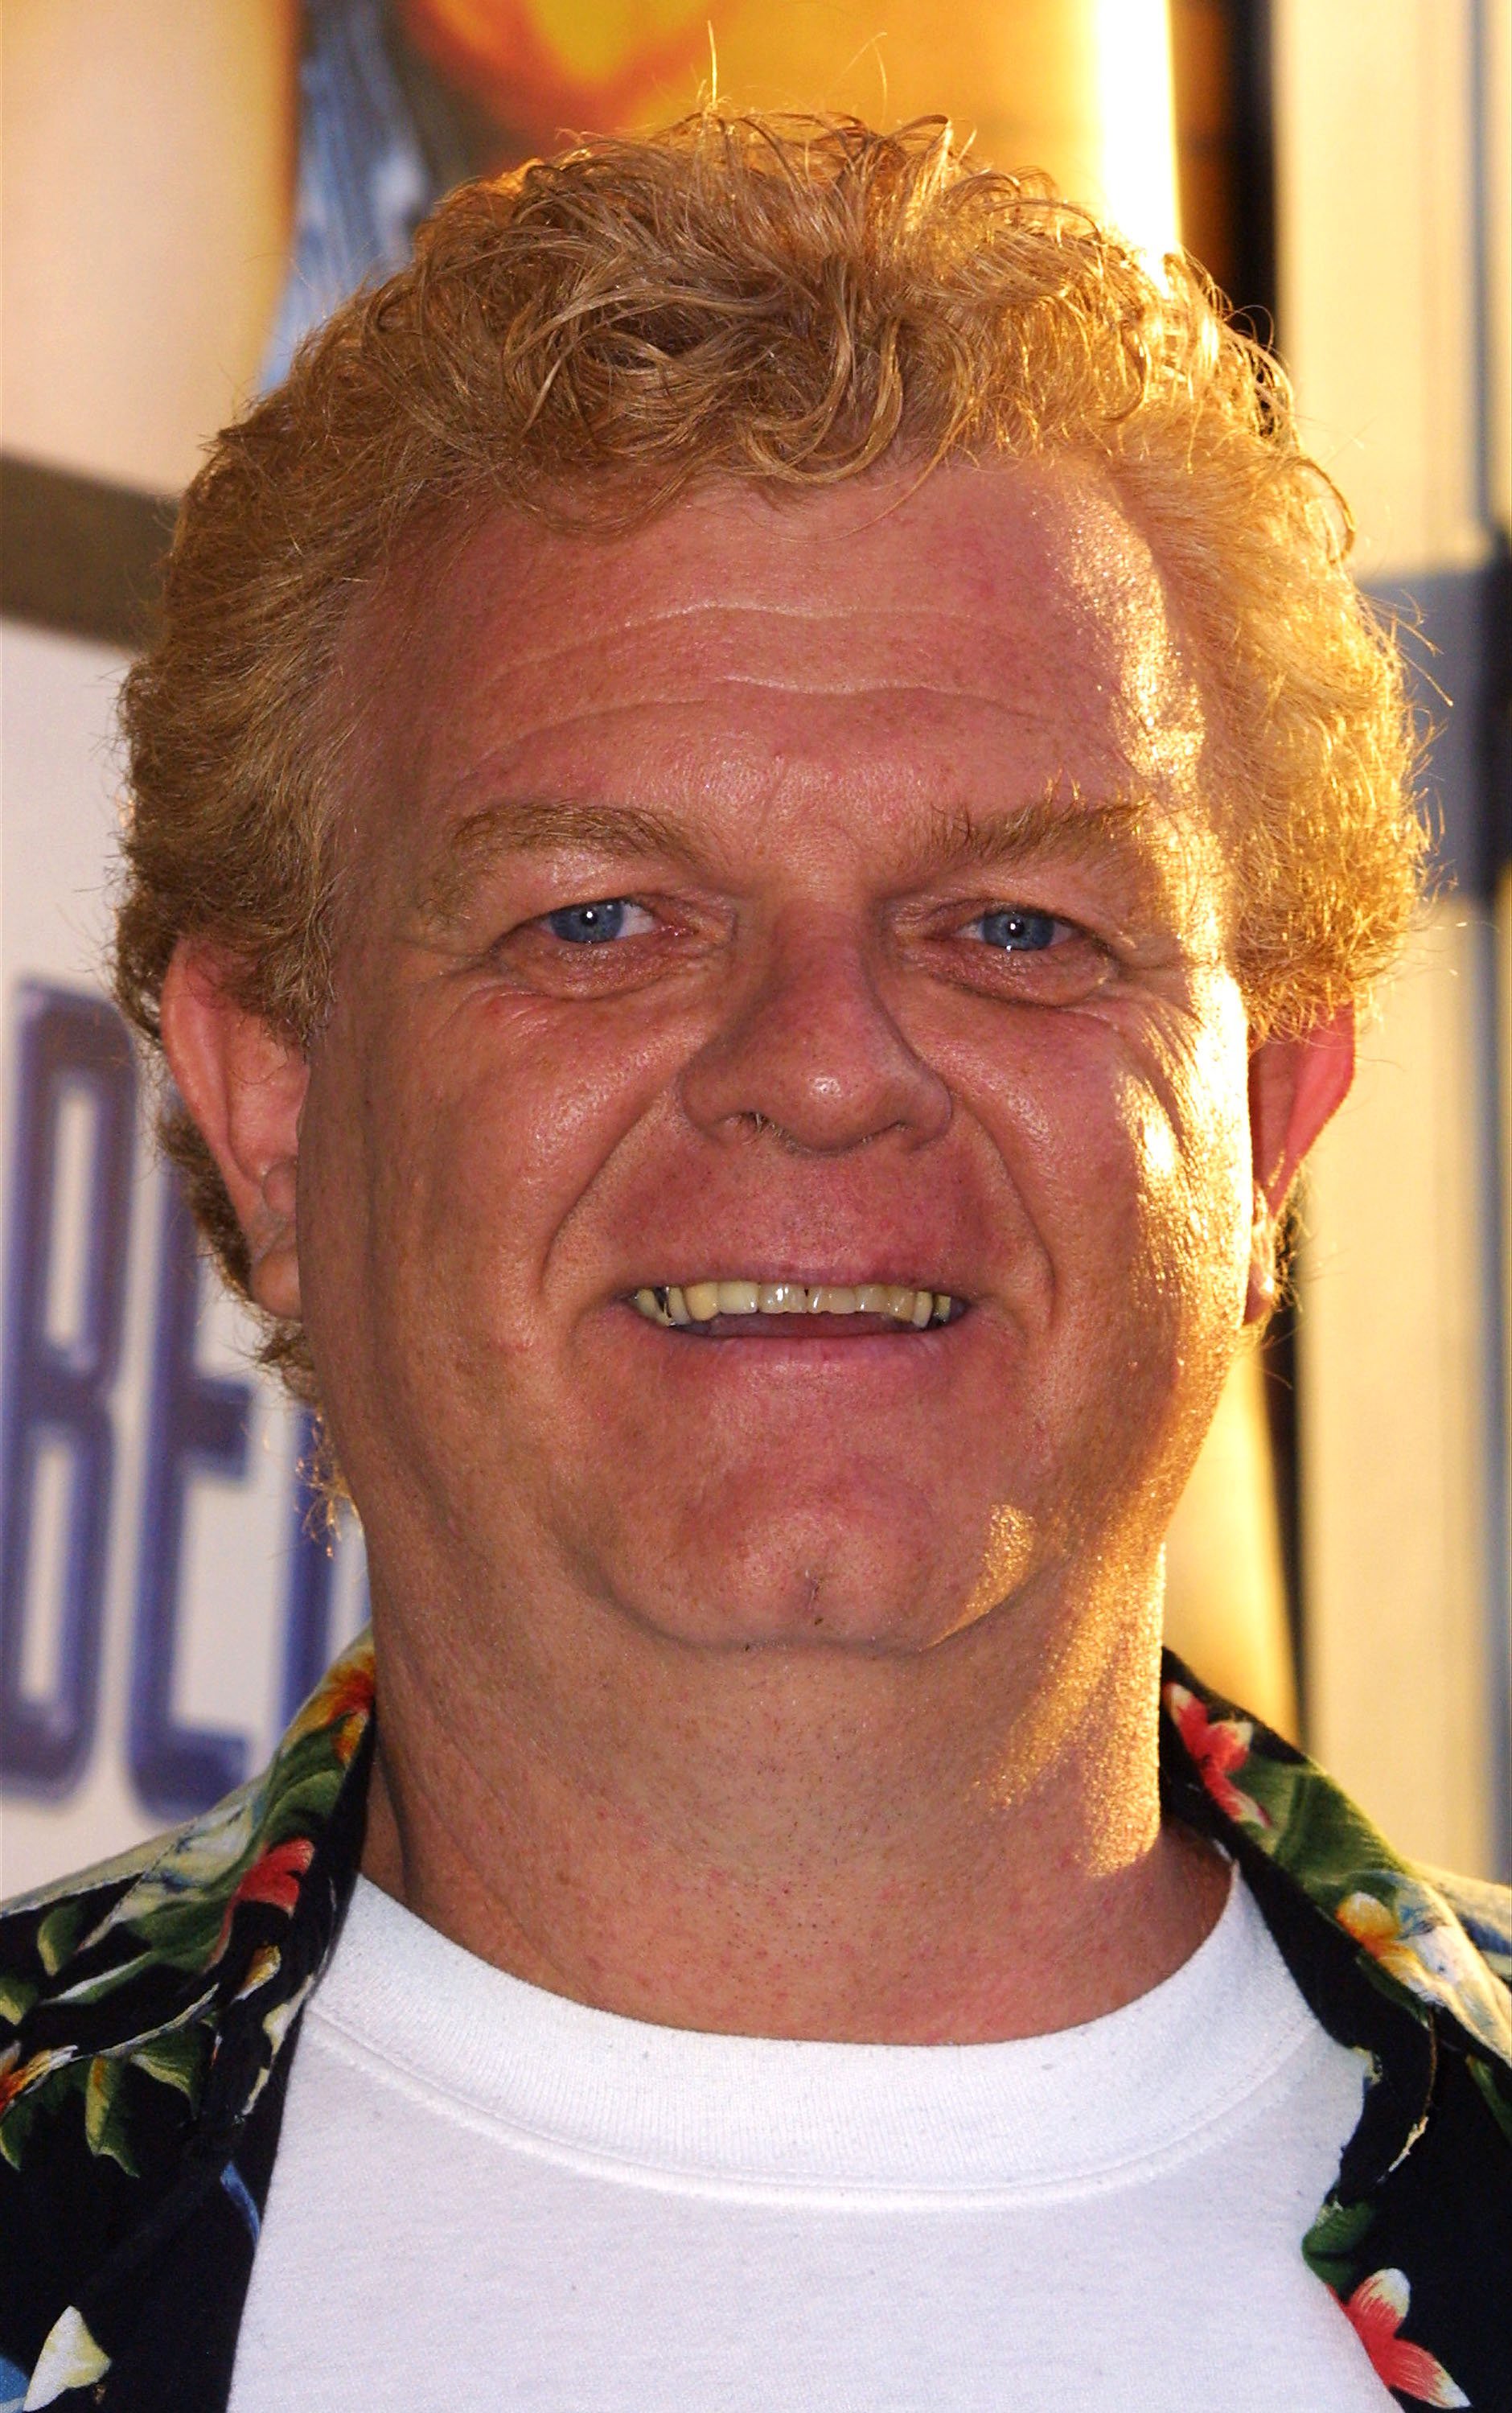 Johnny Whitaker at the film premiere of "Dickie Roberts" on September 3, 2003 | Photo: GettyImages